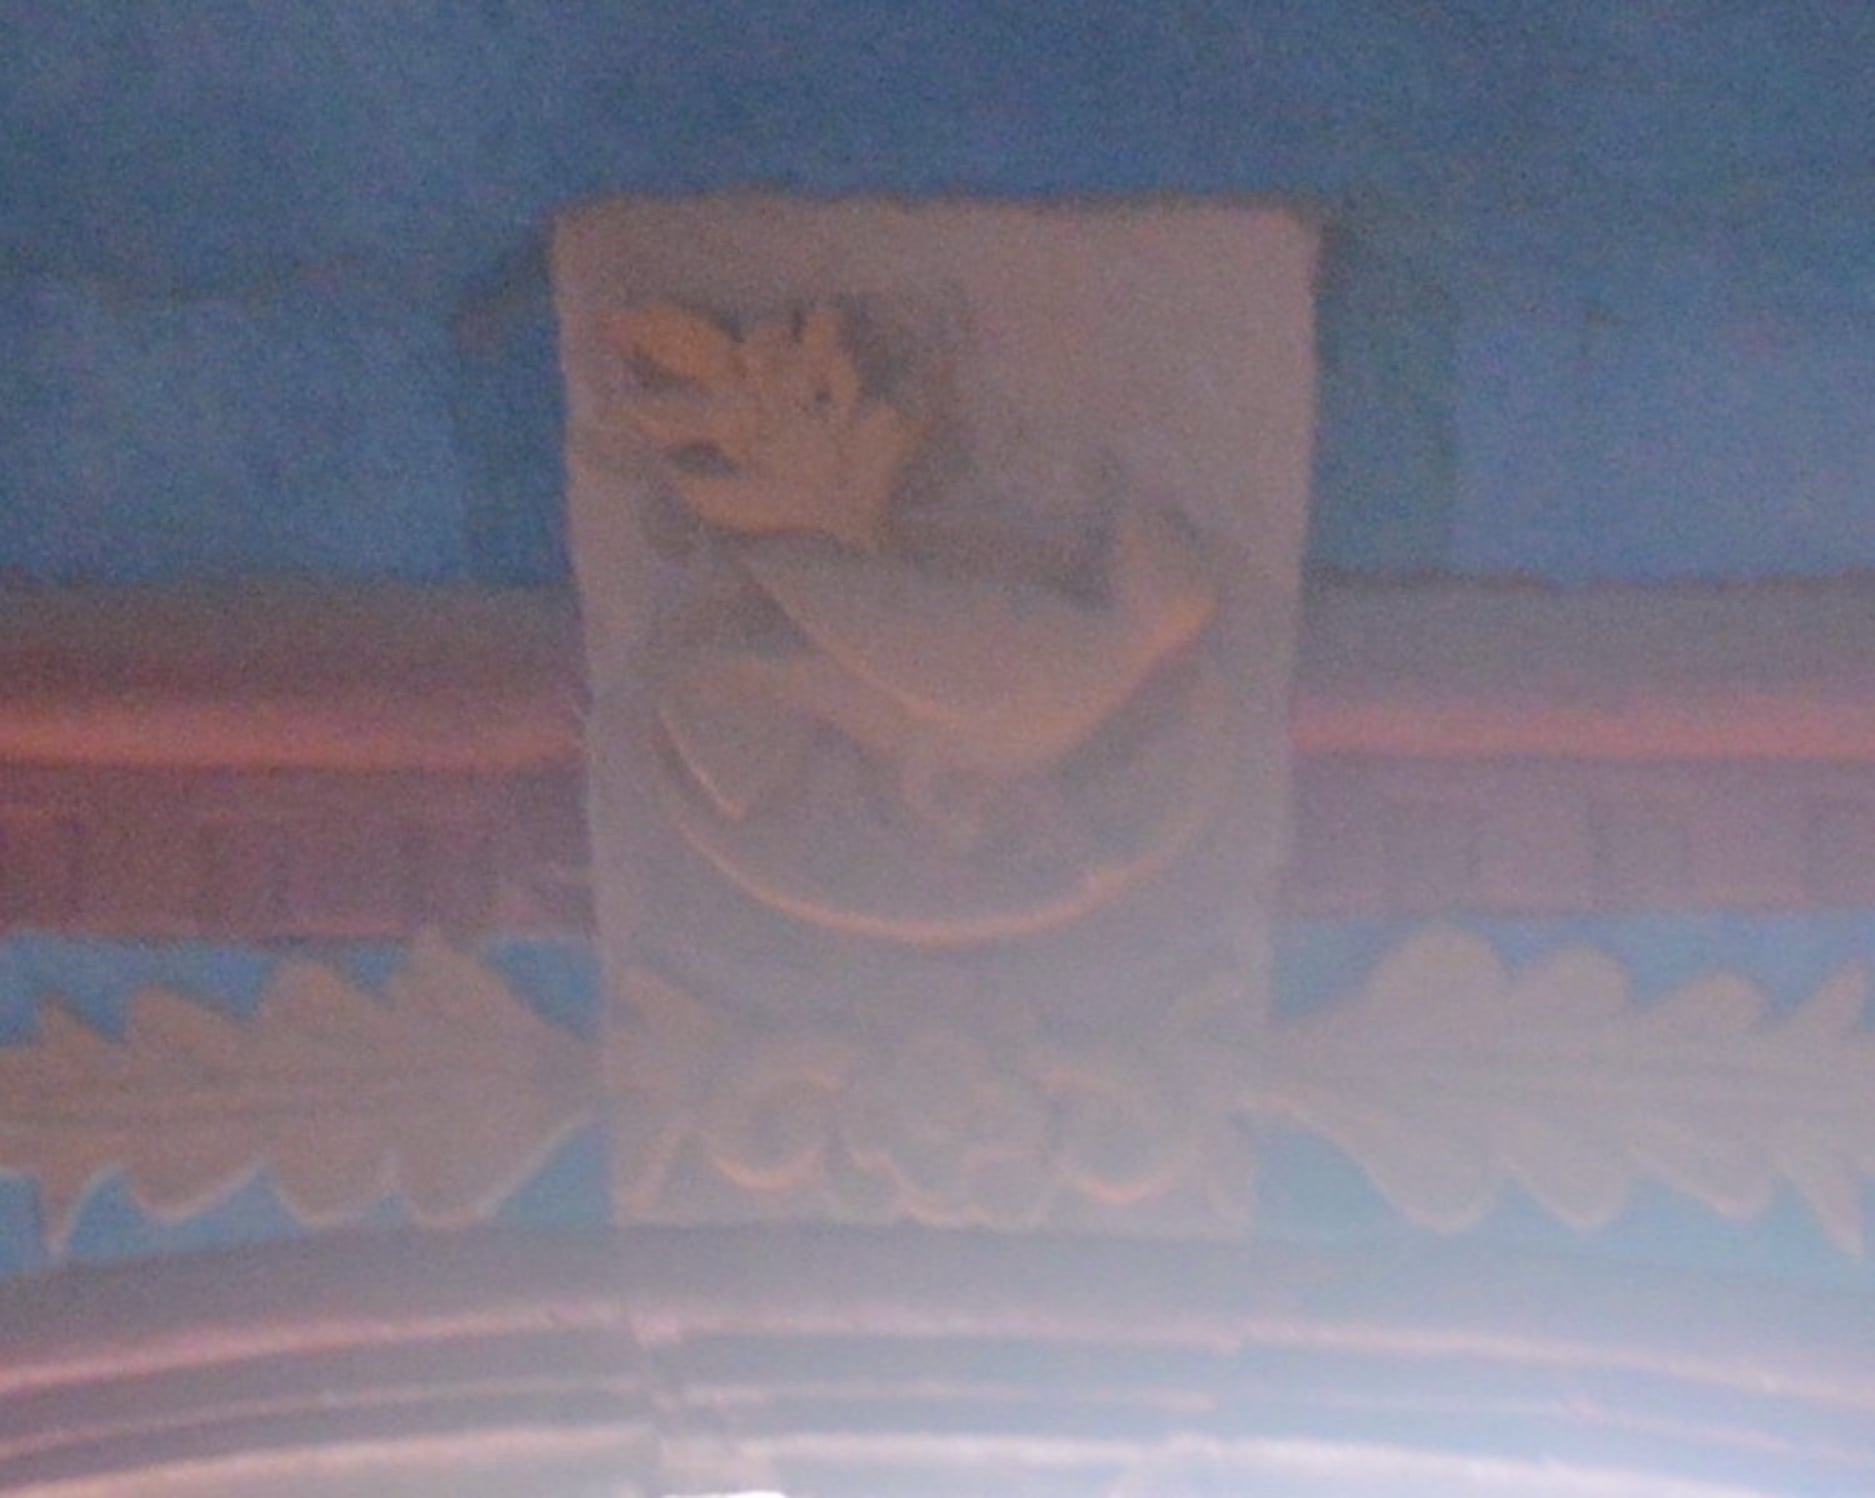 decorative keystone has an image of a partridge on a dish